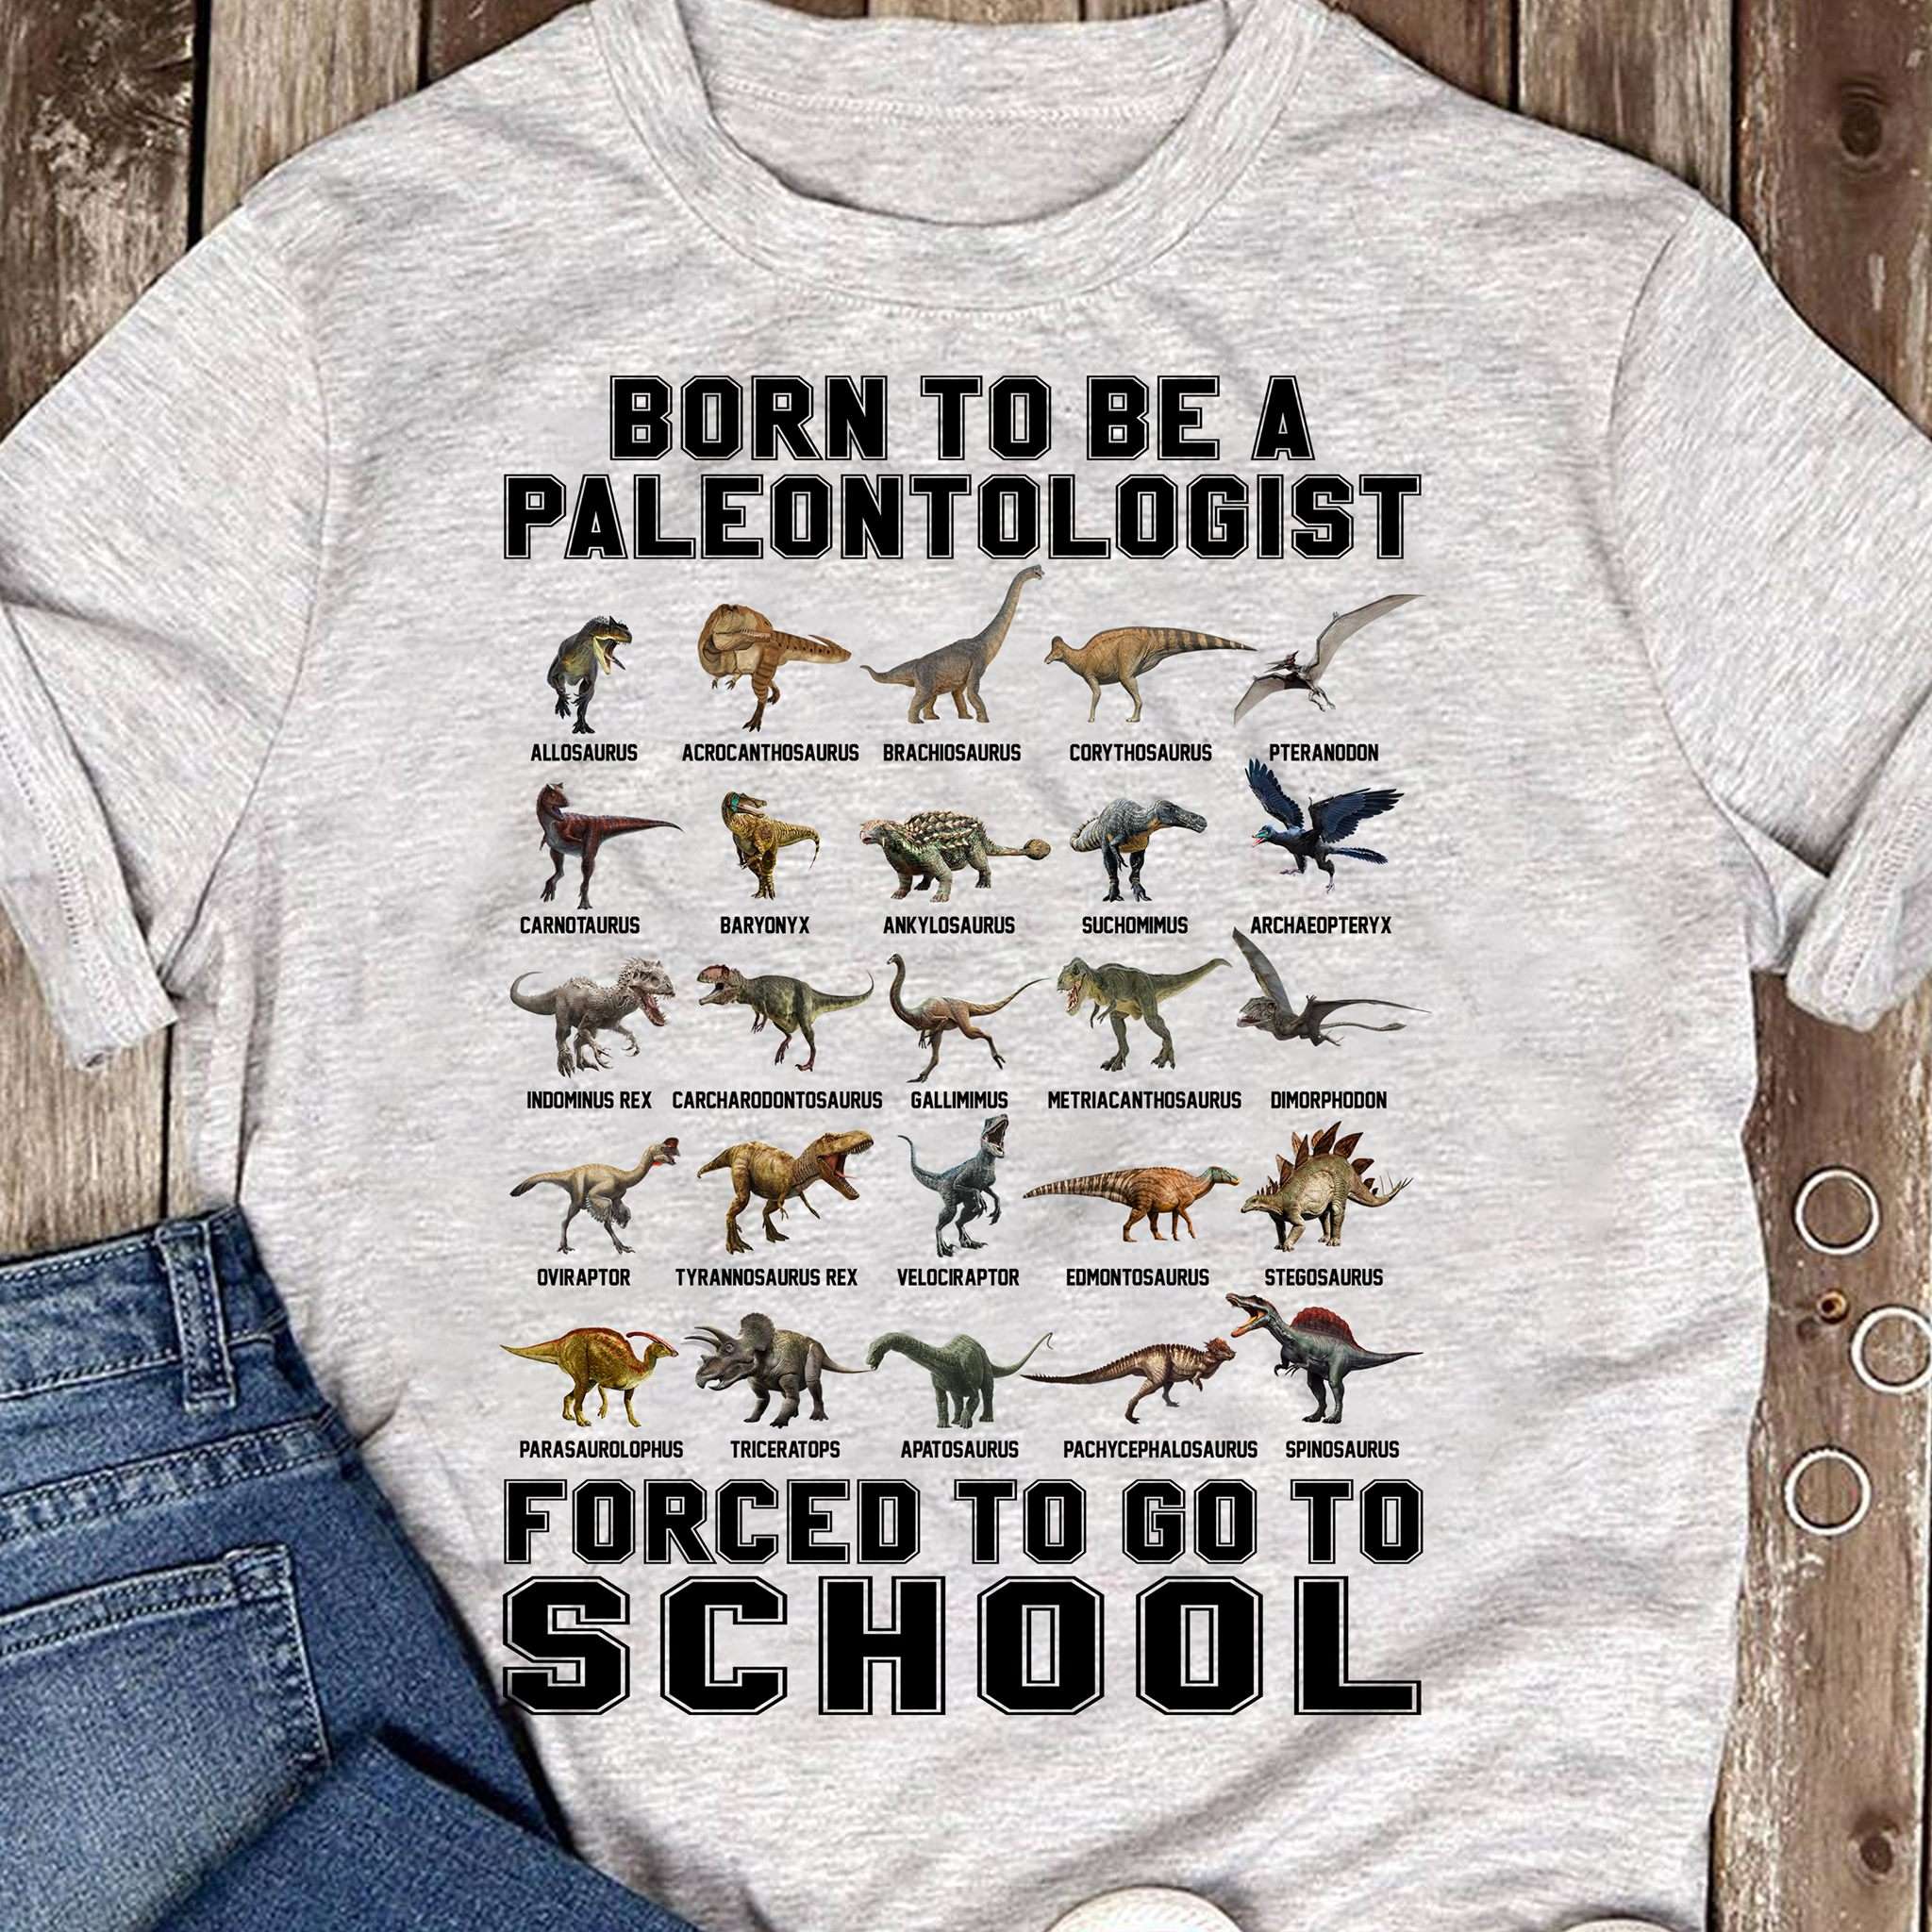 Born to be a Paleontologist, forced to go to school - Dinosaur researcher